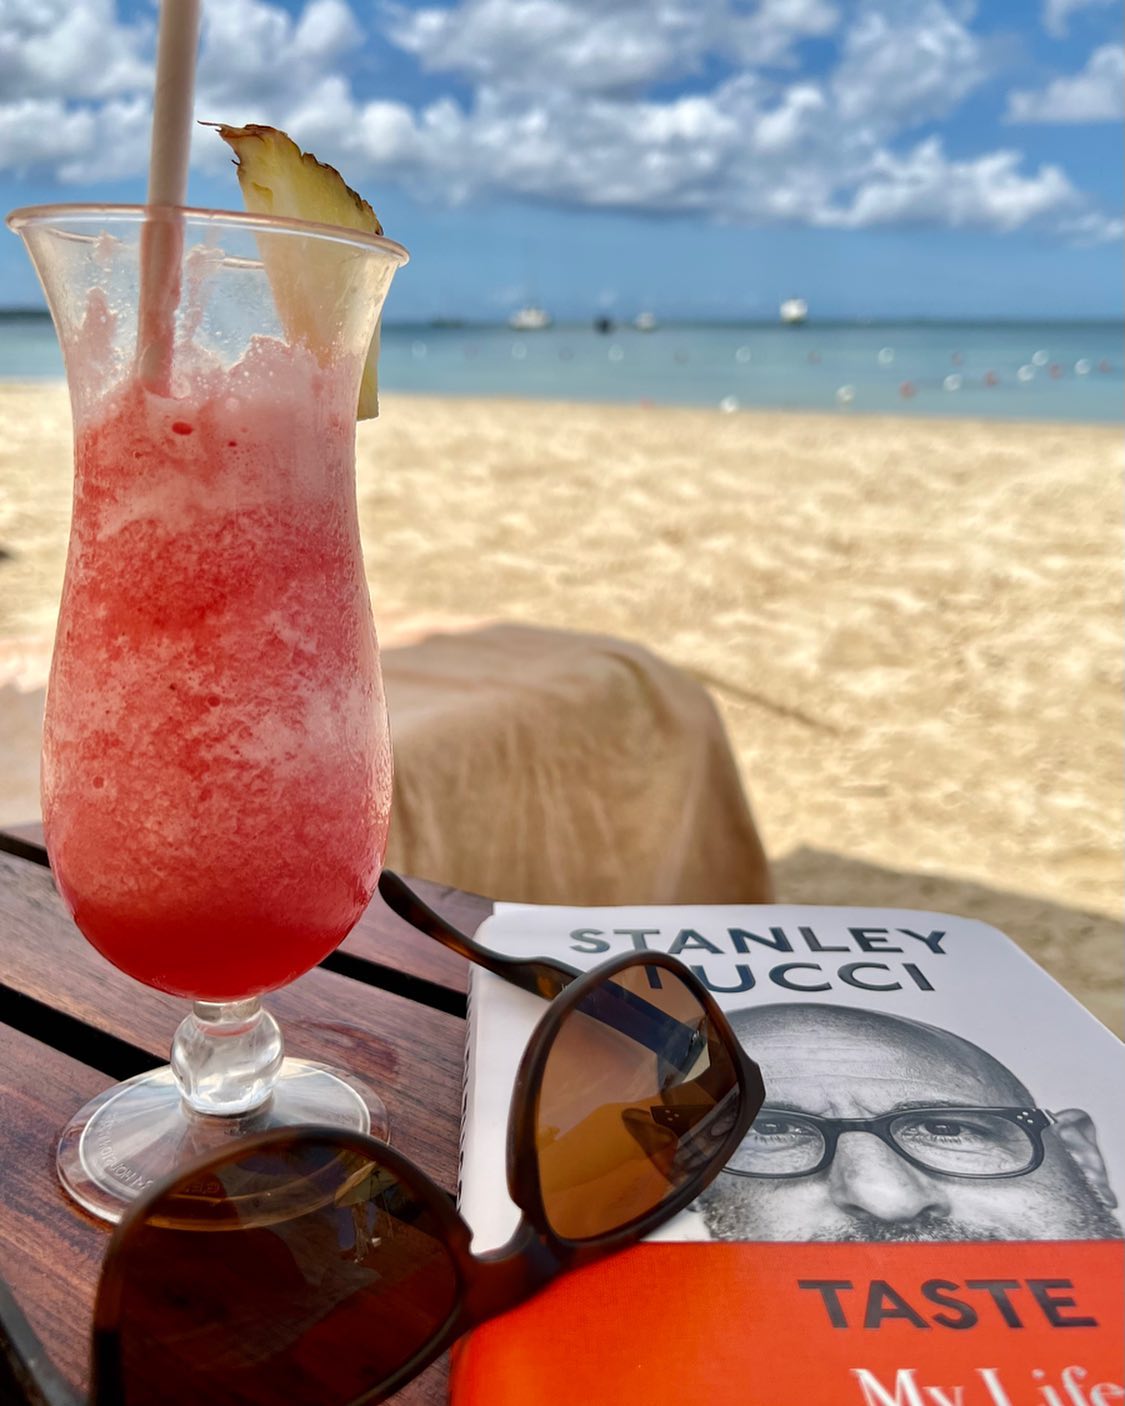 ~ Relaxed 

#imonvacation 
#negril #jamaica #stanleytucci #readagoodbook #sandalsnegril